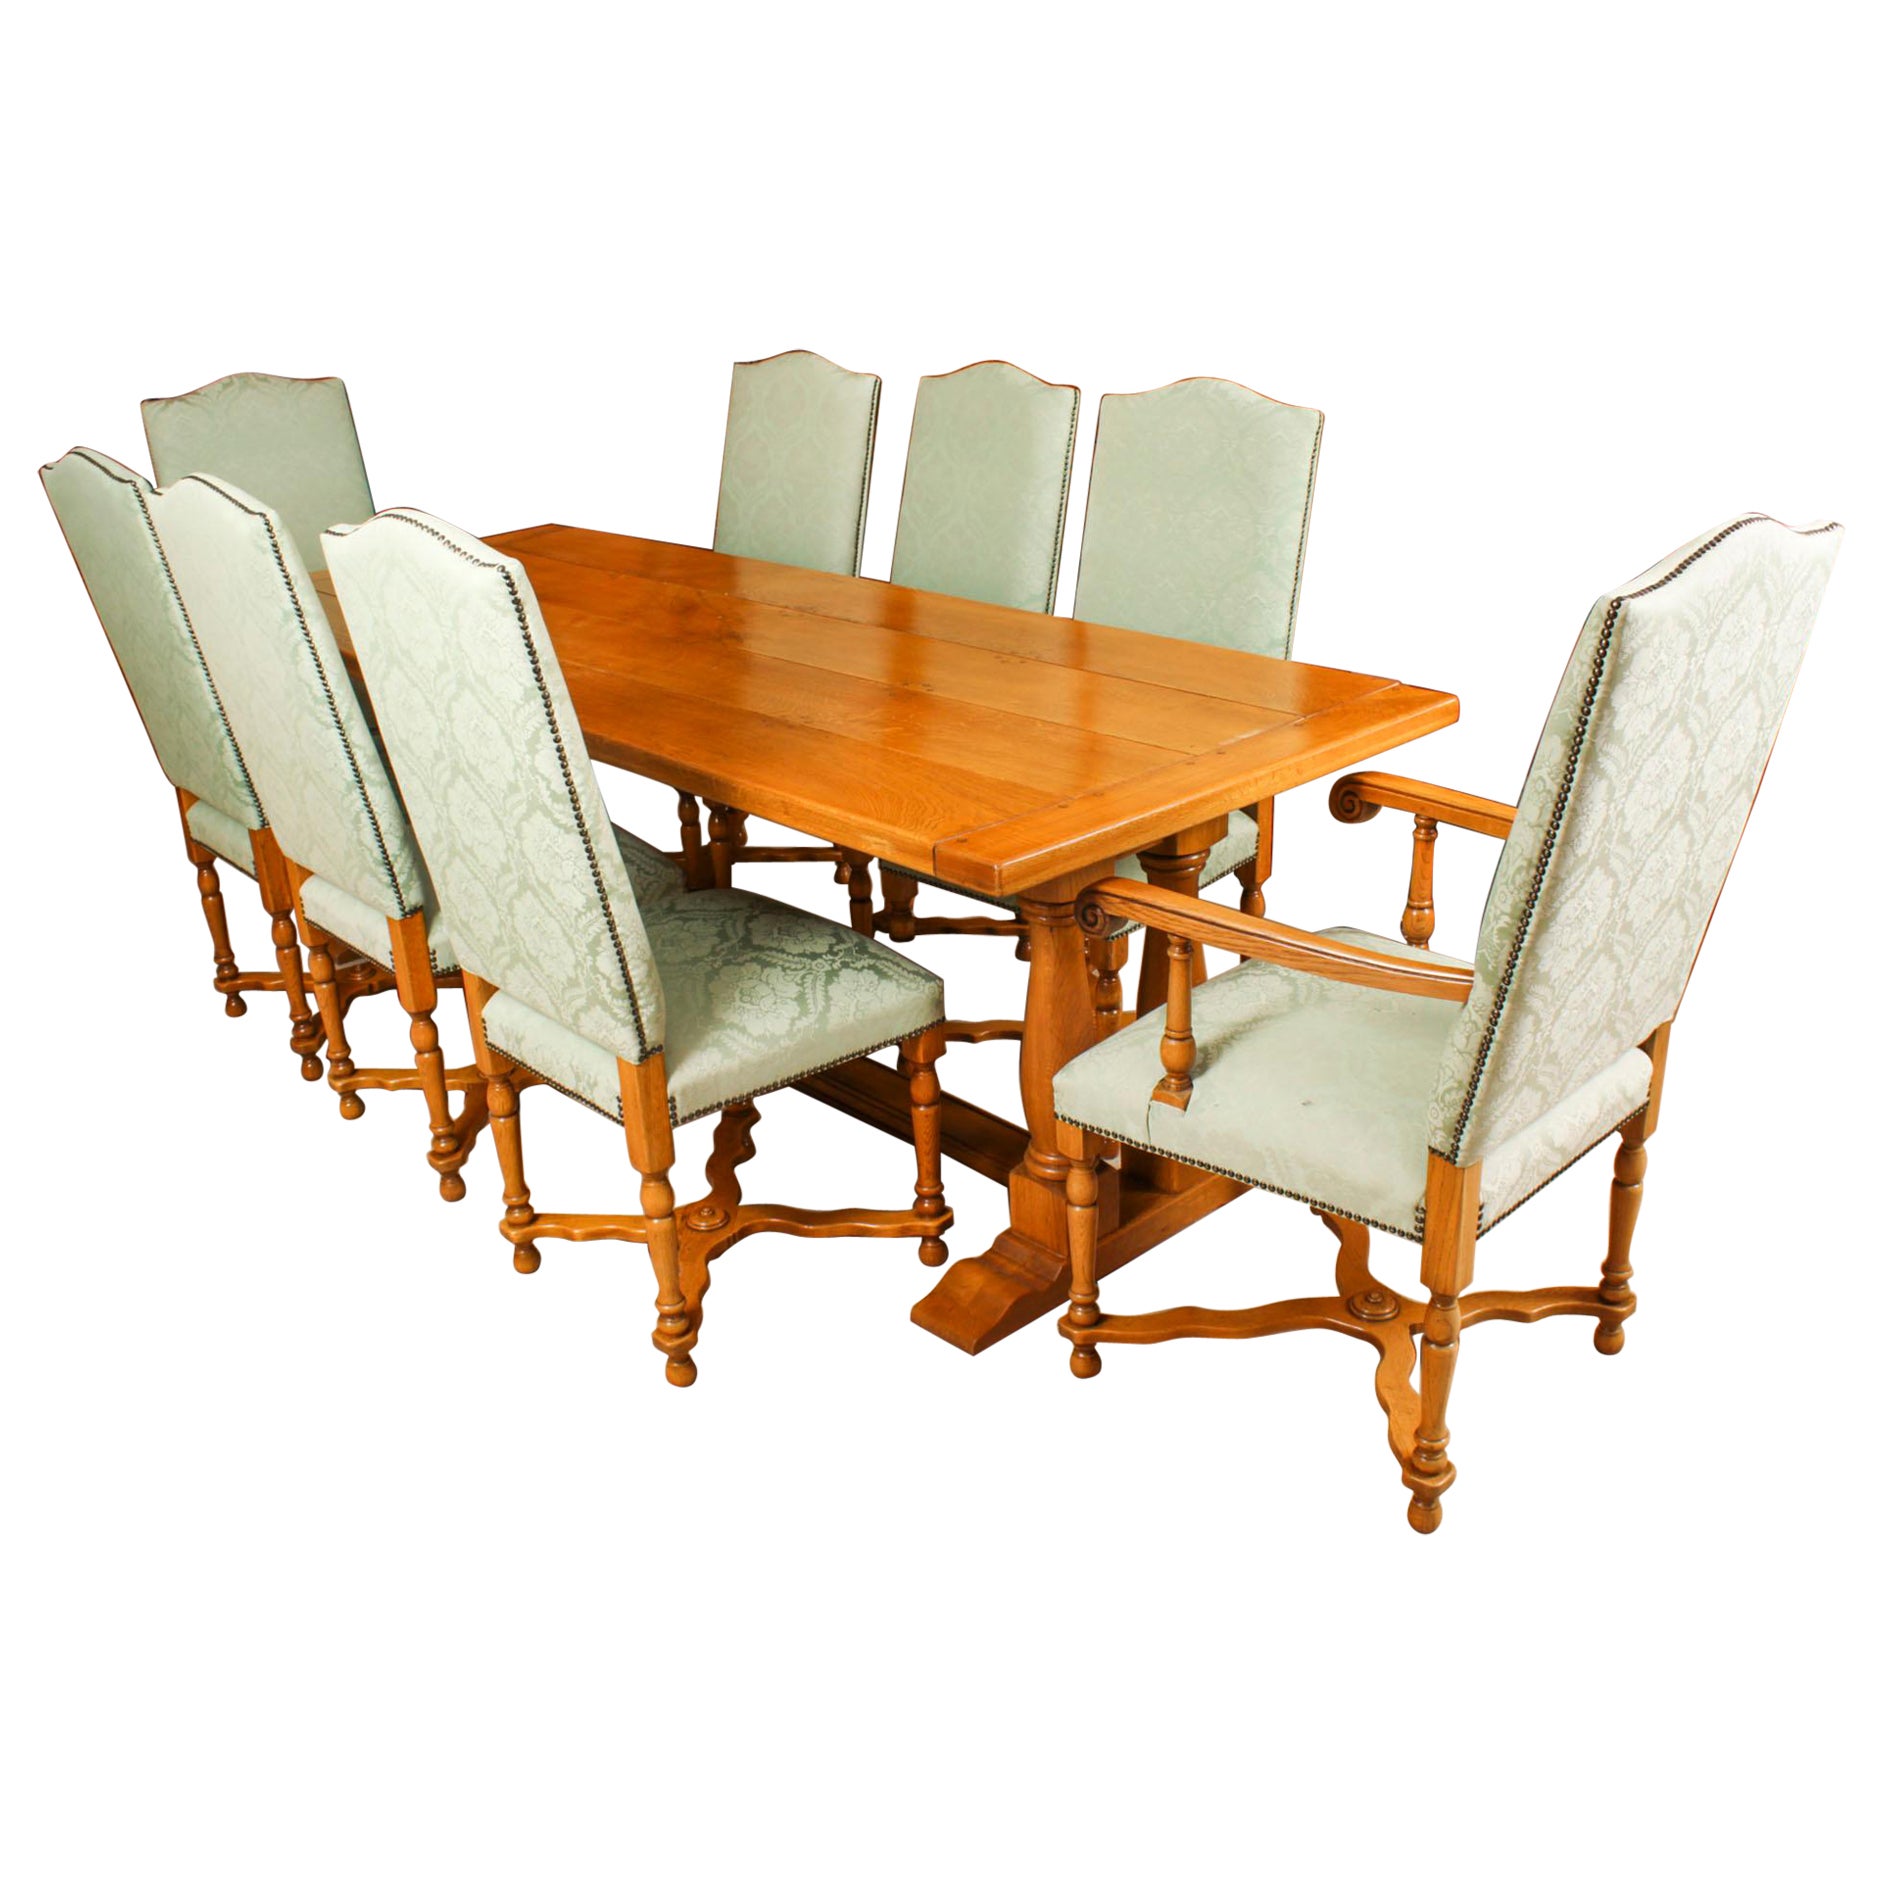 Vintage solid oak Refectory Dining Table, 8 Chairs and Sideboard Late 20th C For Sale